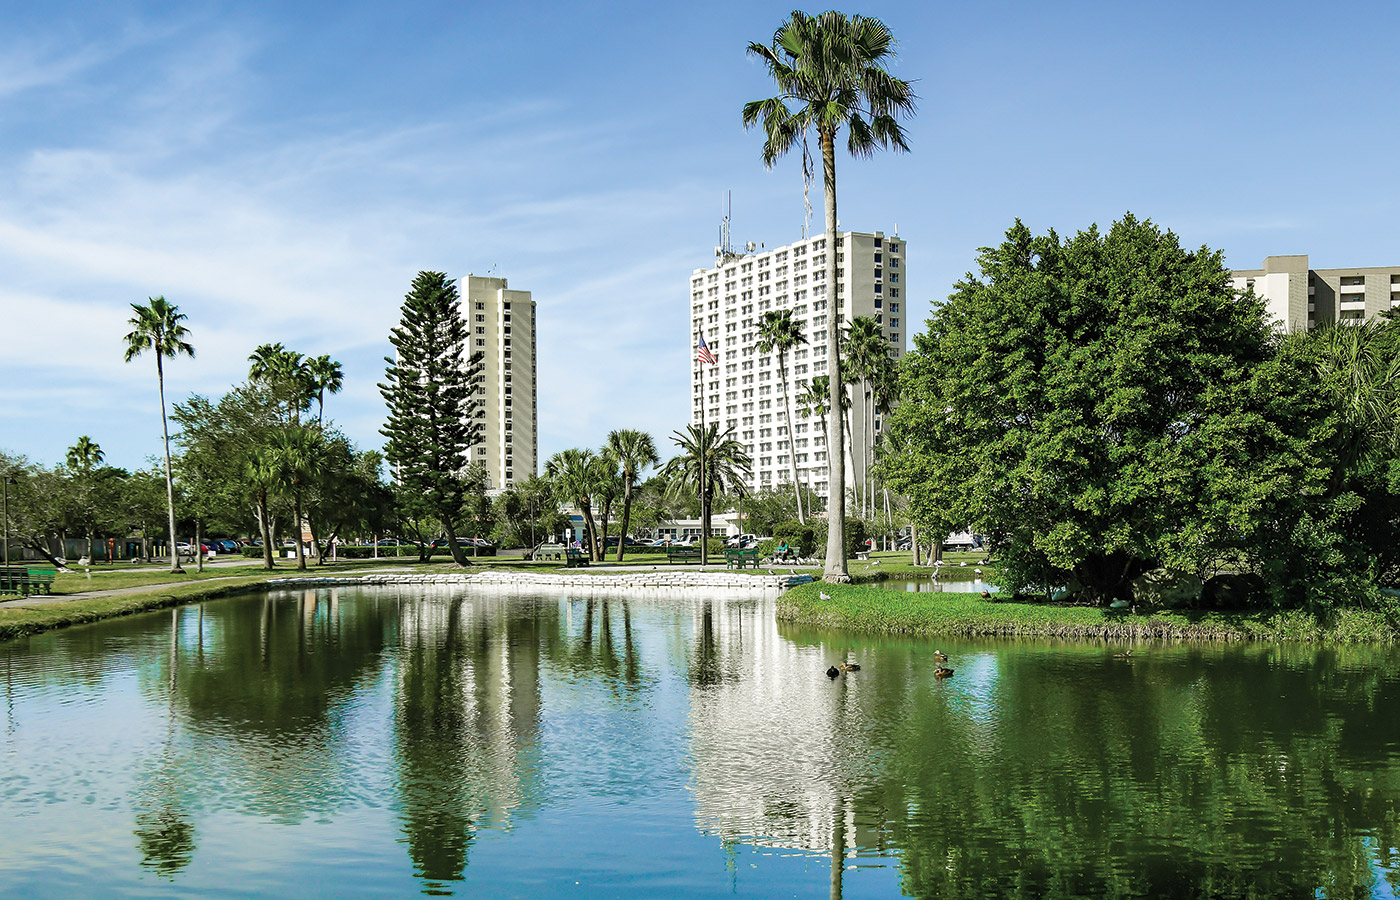 View of the pond with palm tree and building in the background